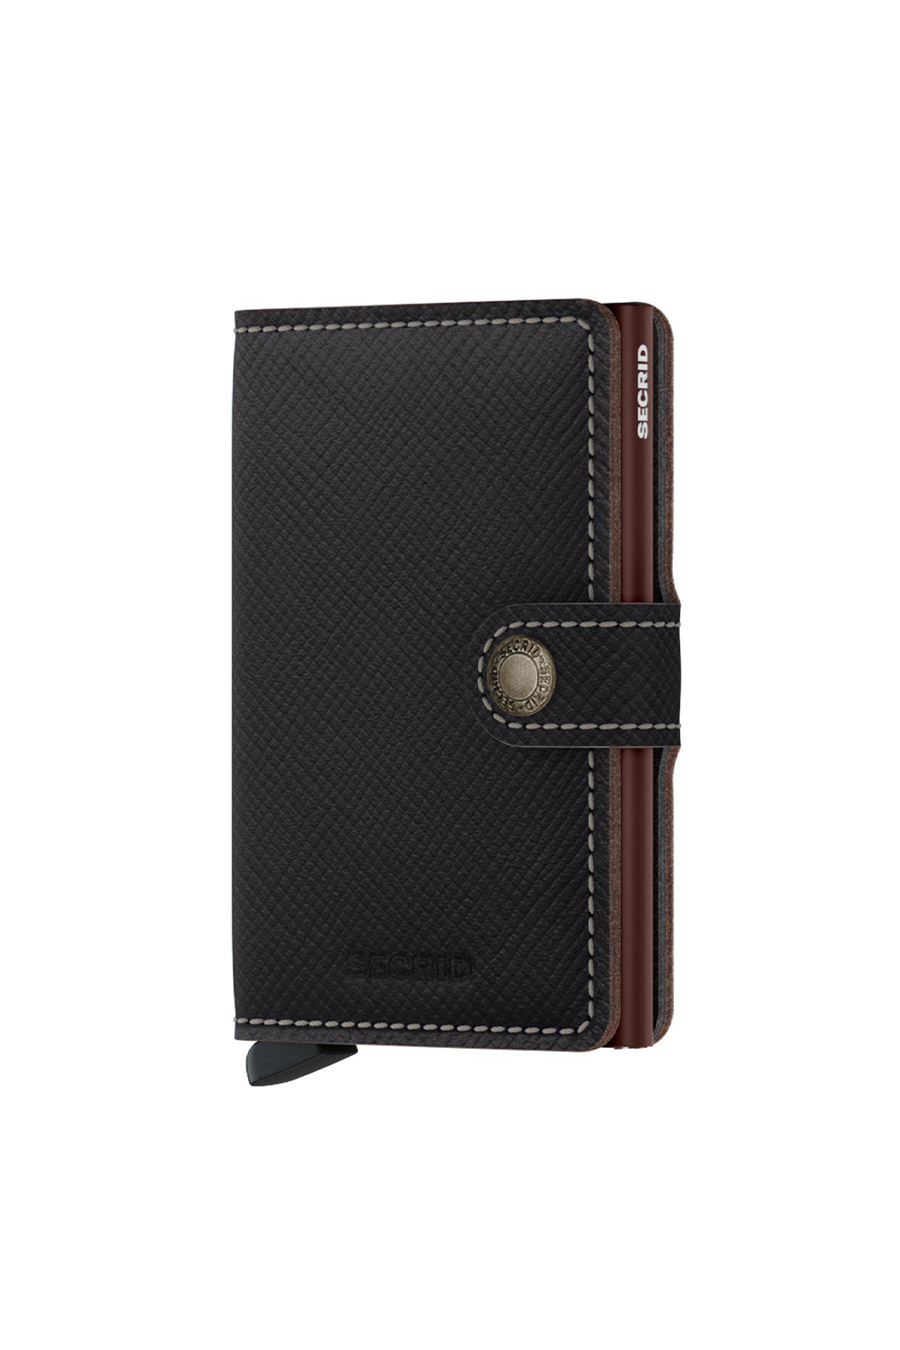 Miniwallet Saffiano | Brown - Main Image Number 1 of 1